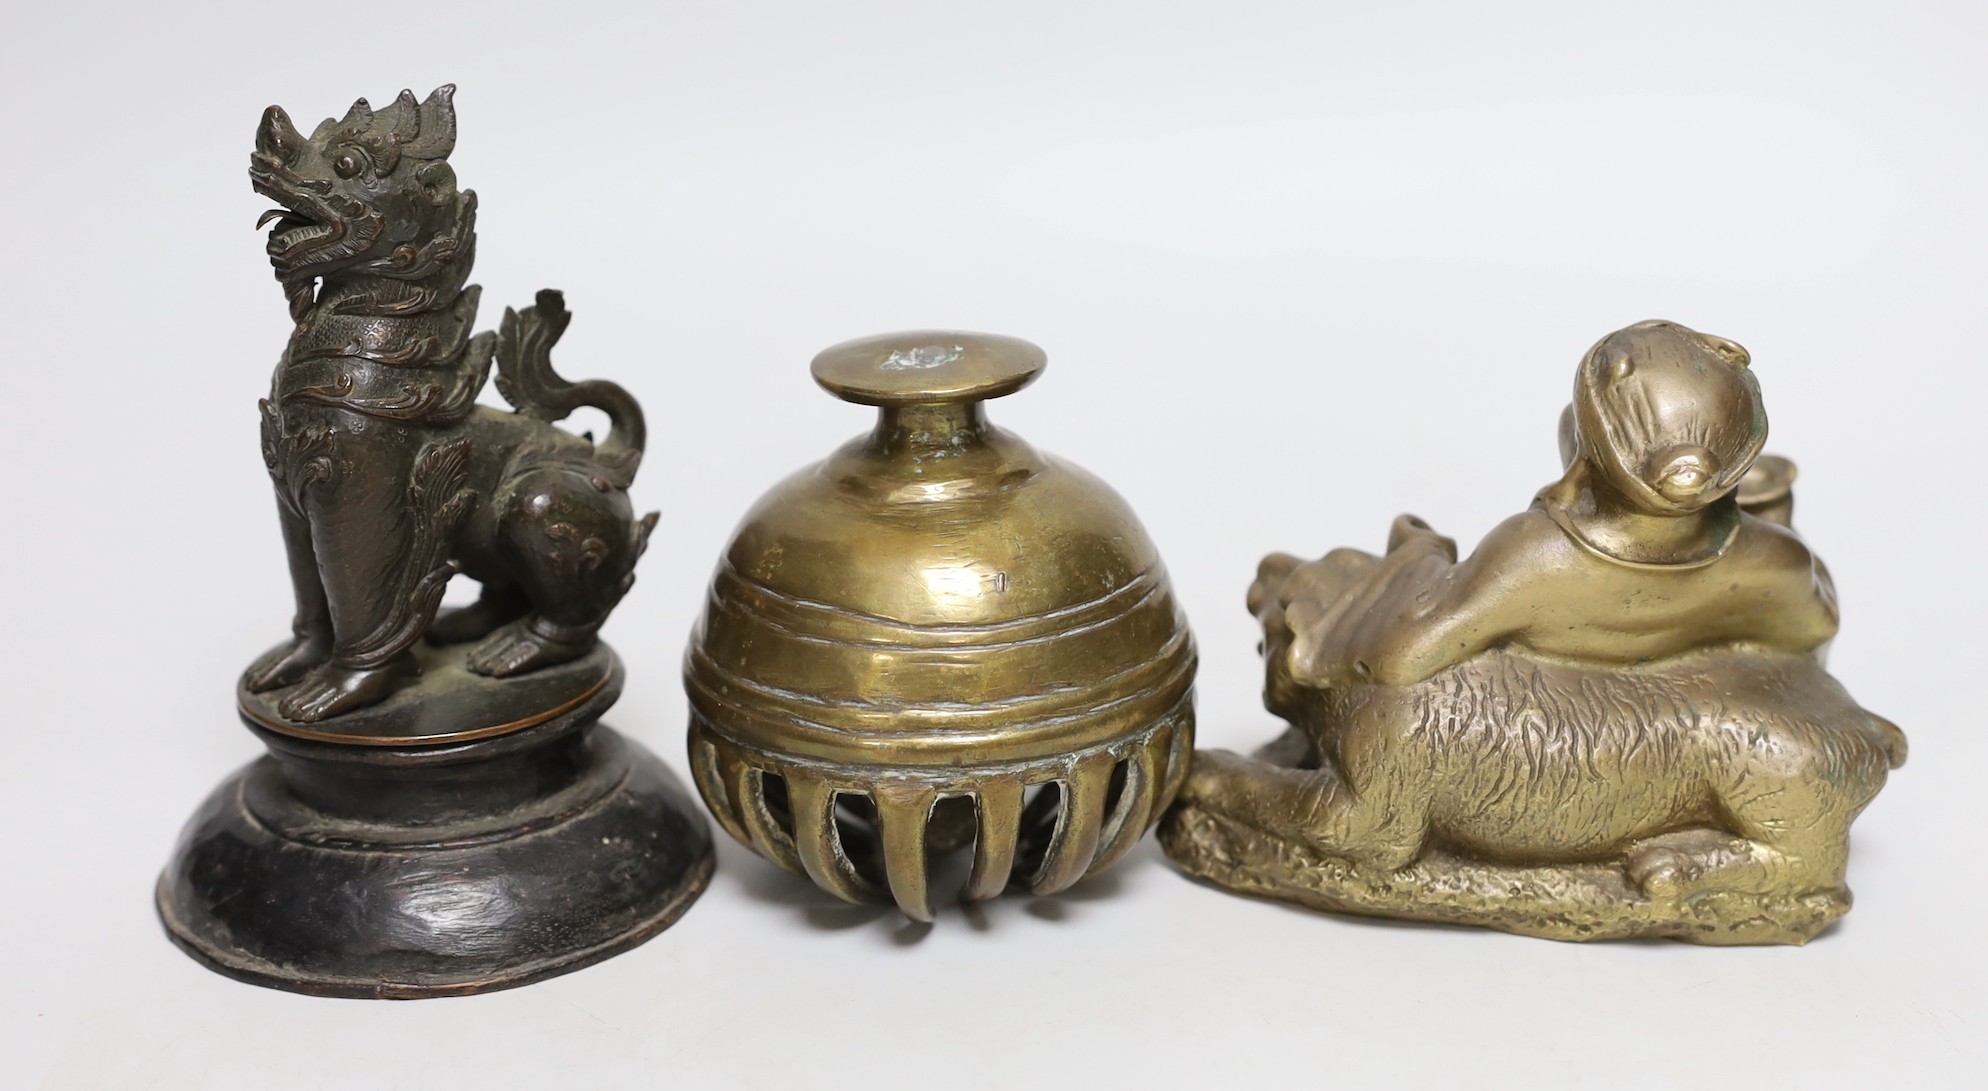 A Chinese bronze seated figure of Budai and tiger together with an Indian elephant bell and a Burmese bronze temple dog